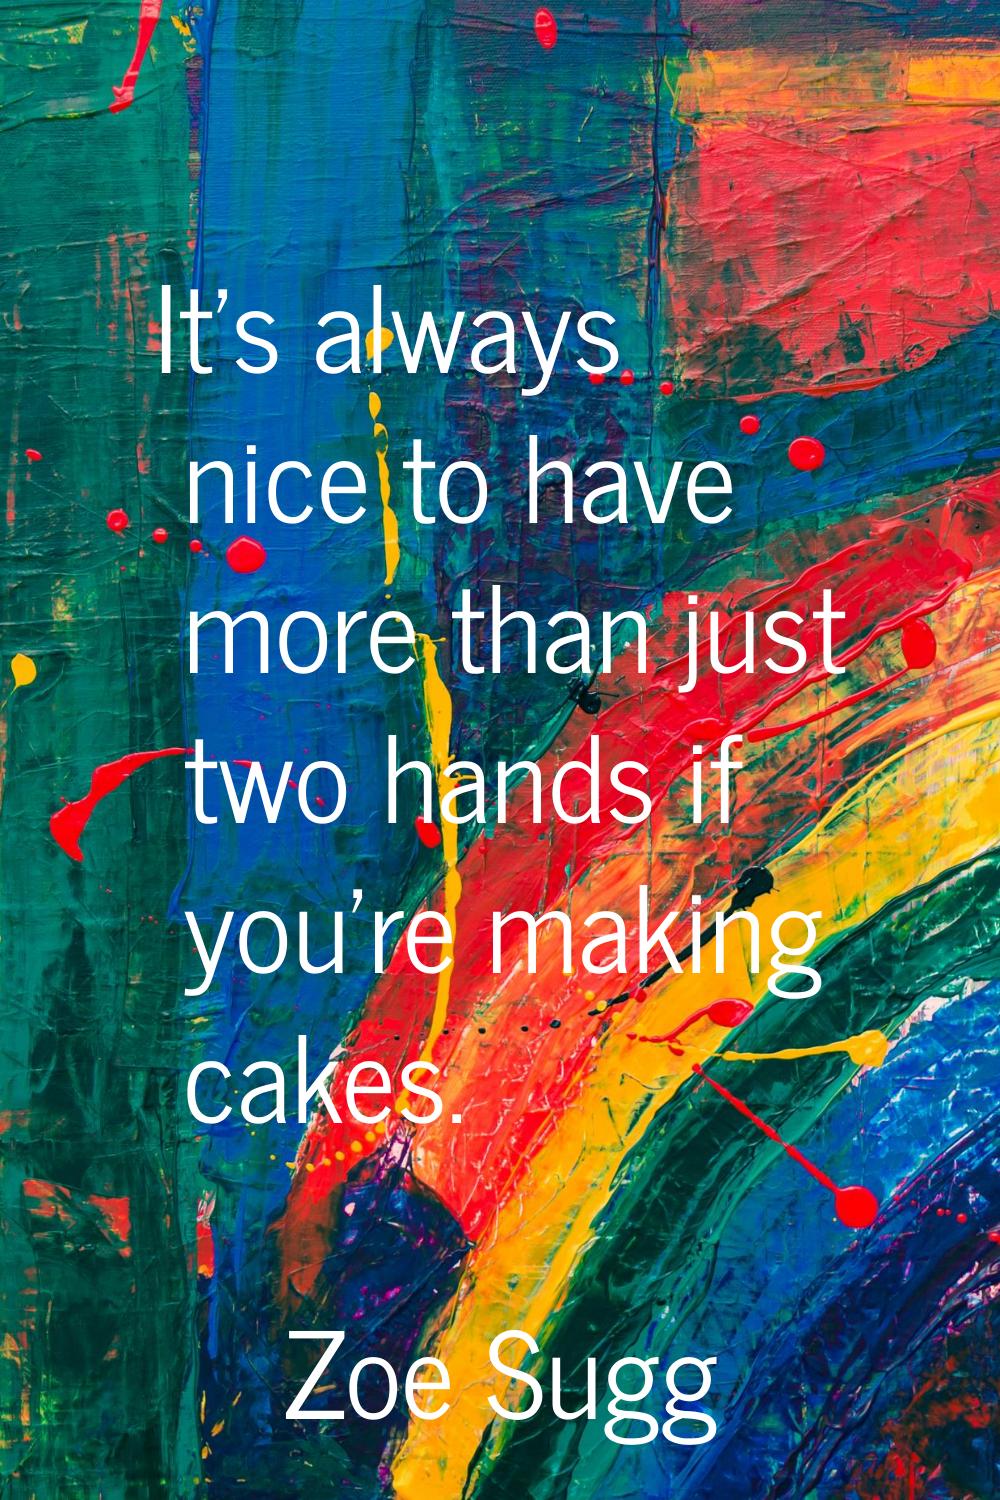 It's always nice to have more than just two hands if you're making cakes.